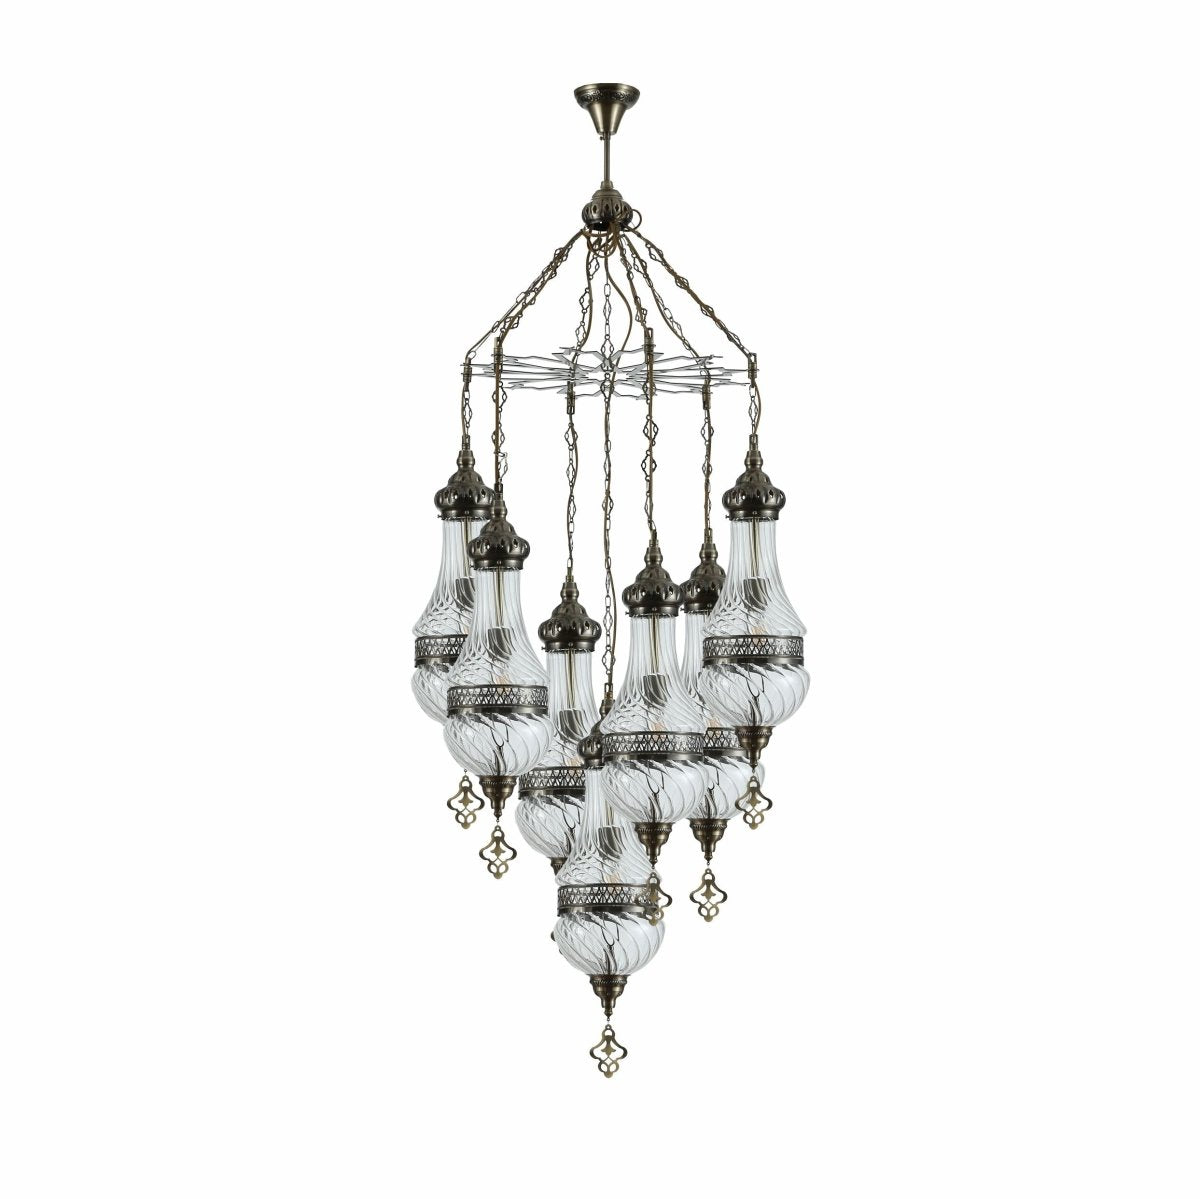 Main image of Moroccan Style Antique Brass and Clear Glass Chandelier with 7xE27 | TEKLED 158-19557